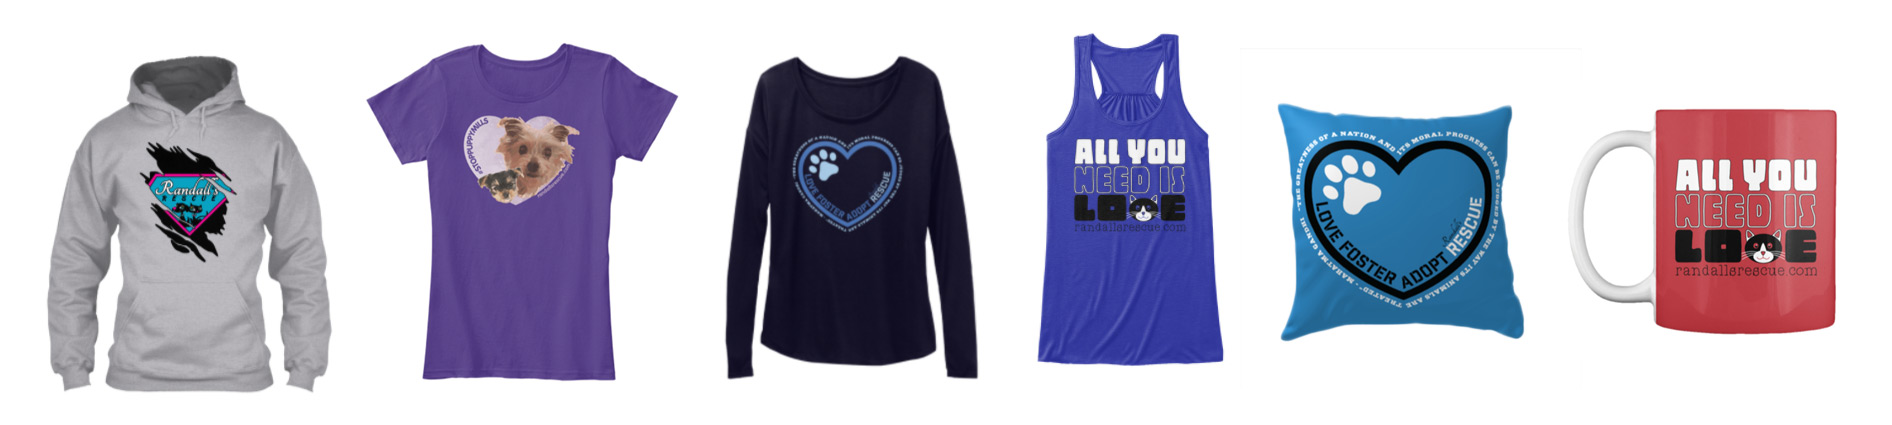 Shop Randall's Rescue Apparel & Accessories to Support Us!